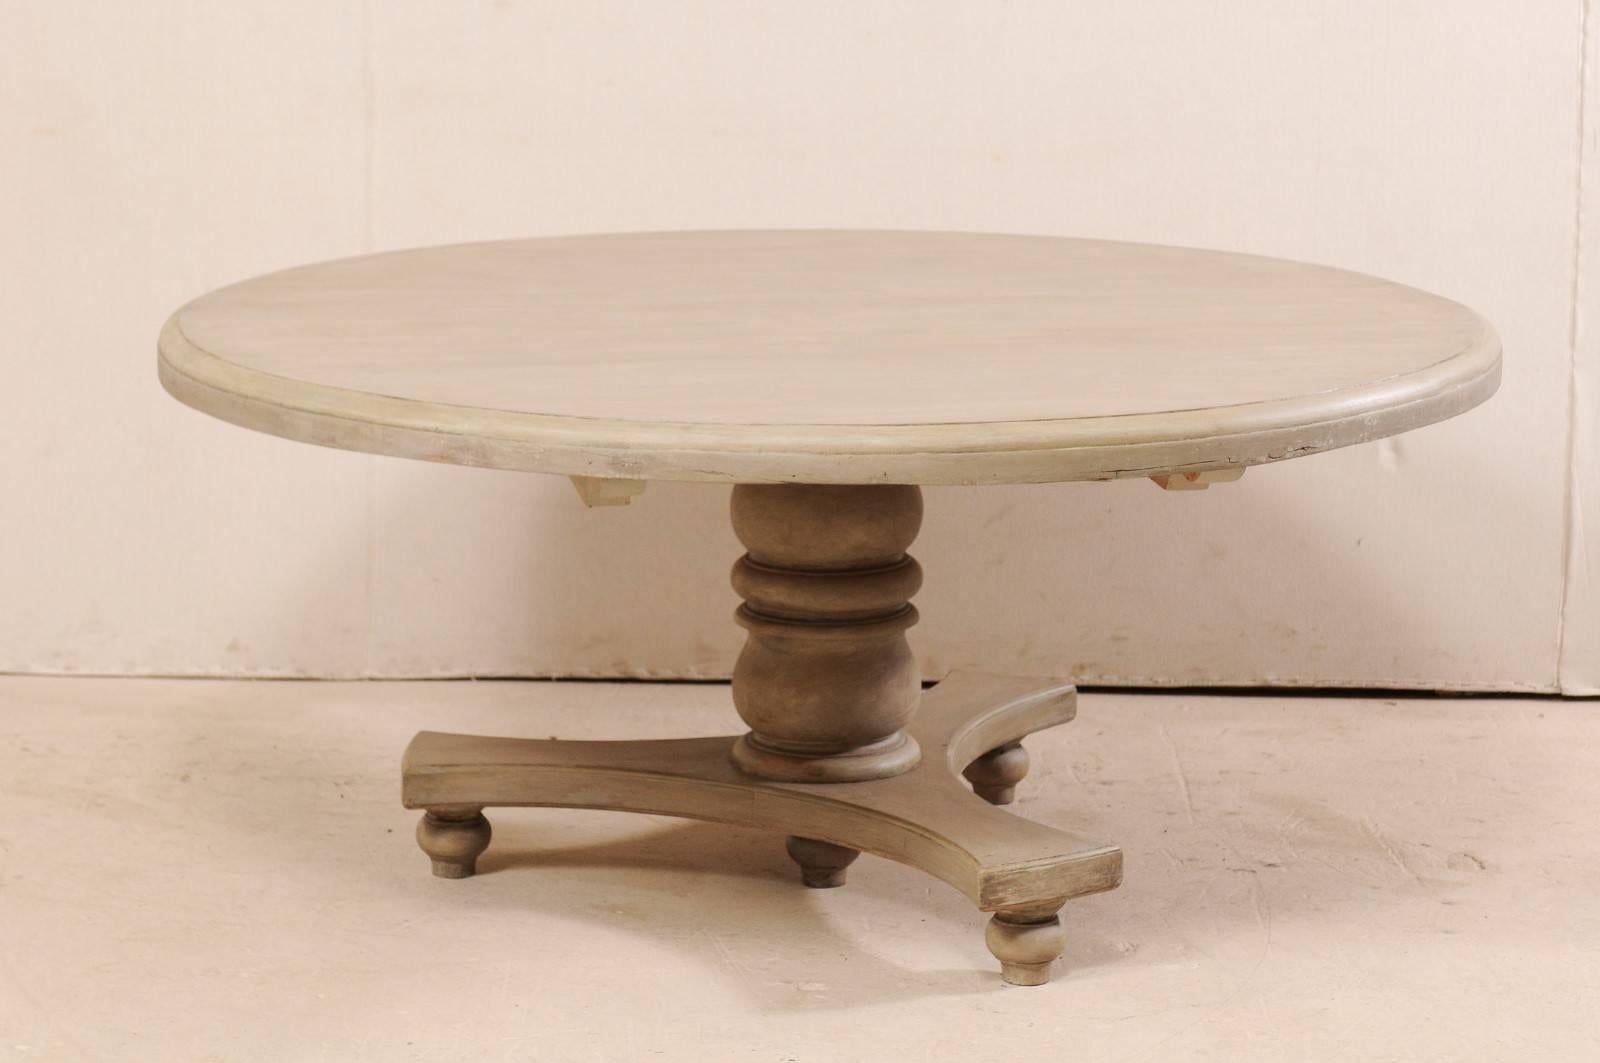 This lovely round-shaped table has been newly fashioned making use of old recycled jackwood. The table features a round top, almost 5.5